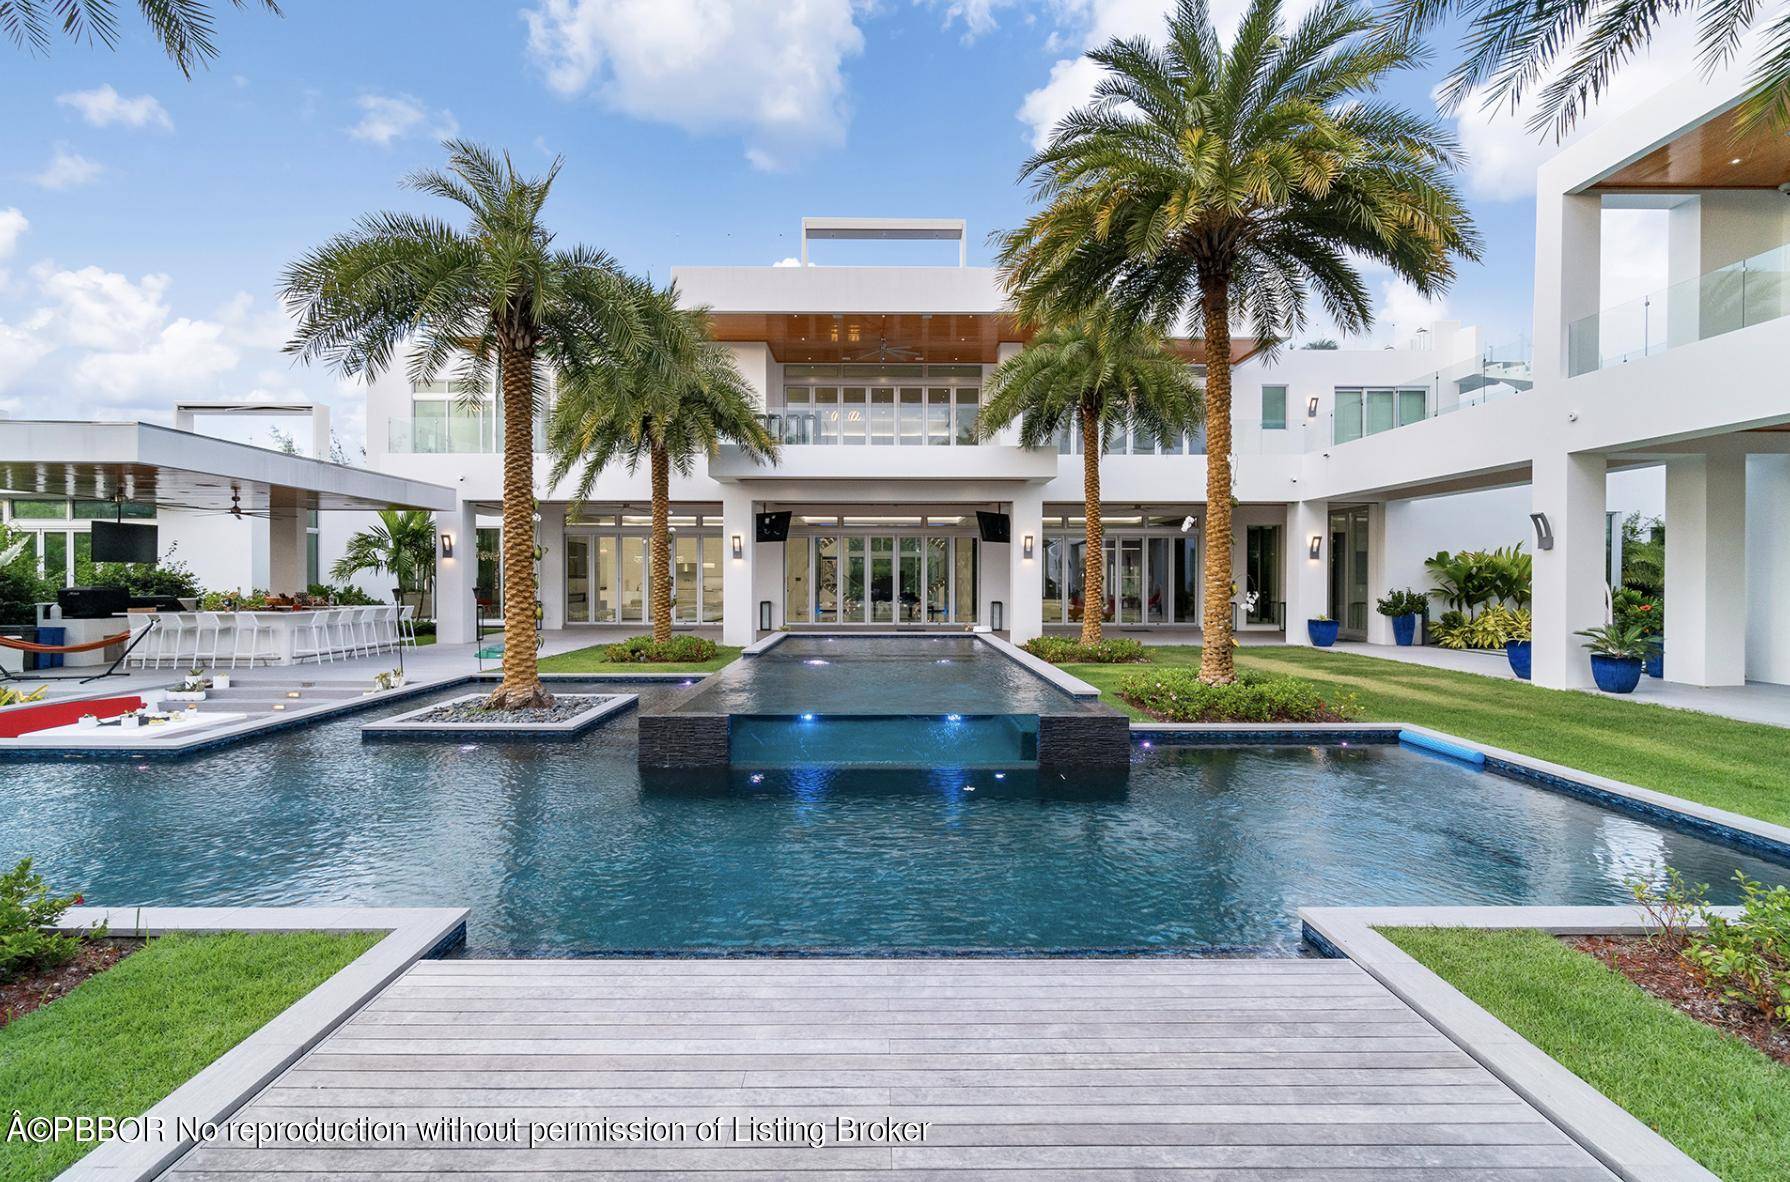 This contemporary masterpiece is comprised of nearly 2 acres of paradise in the highly sought after enclave of Seminole Landing.